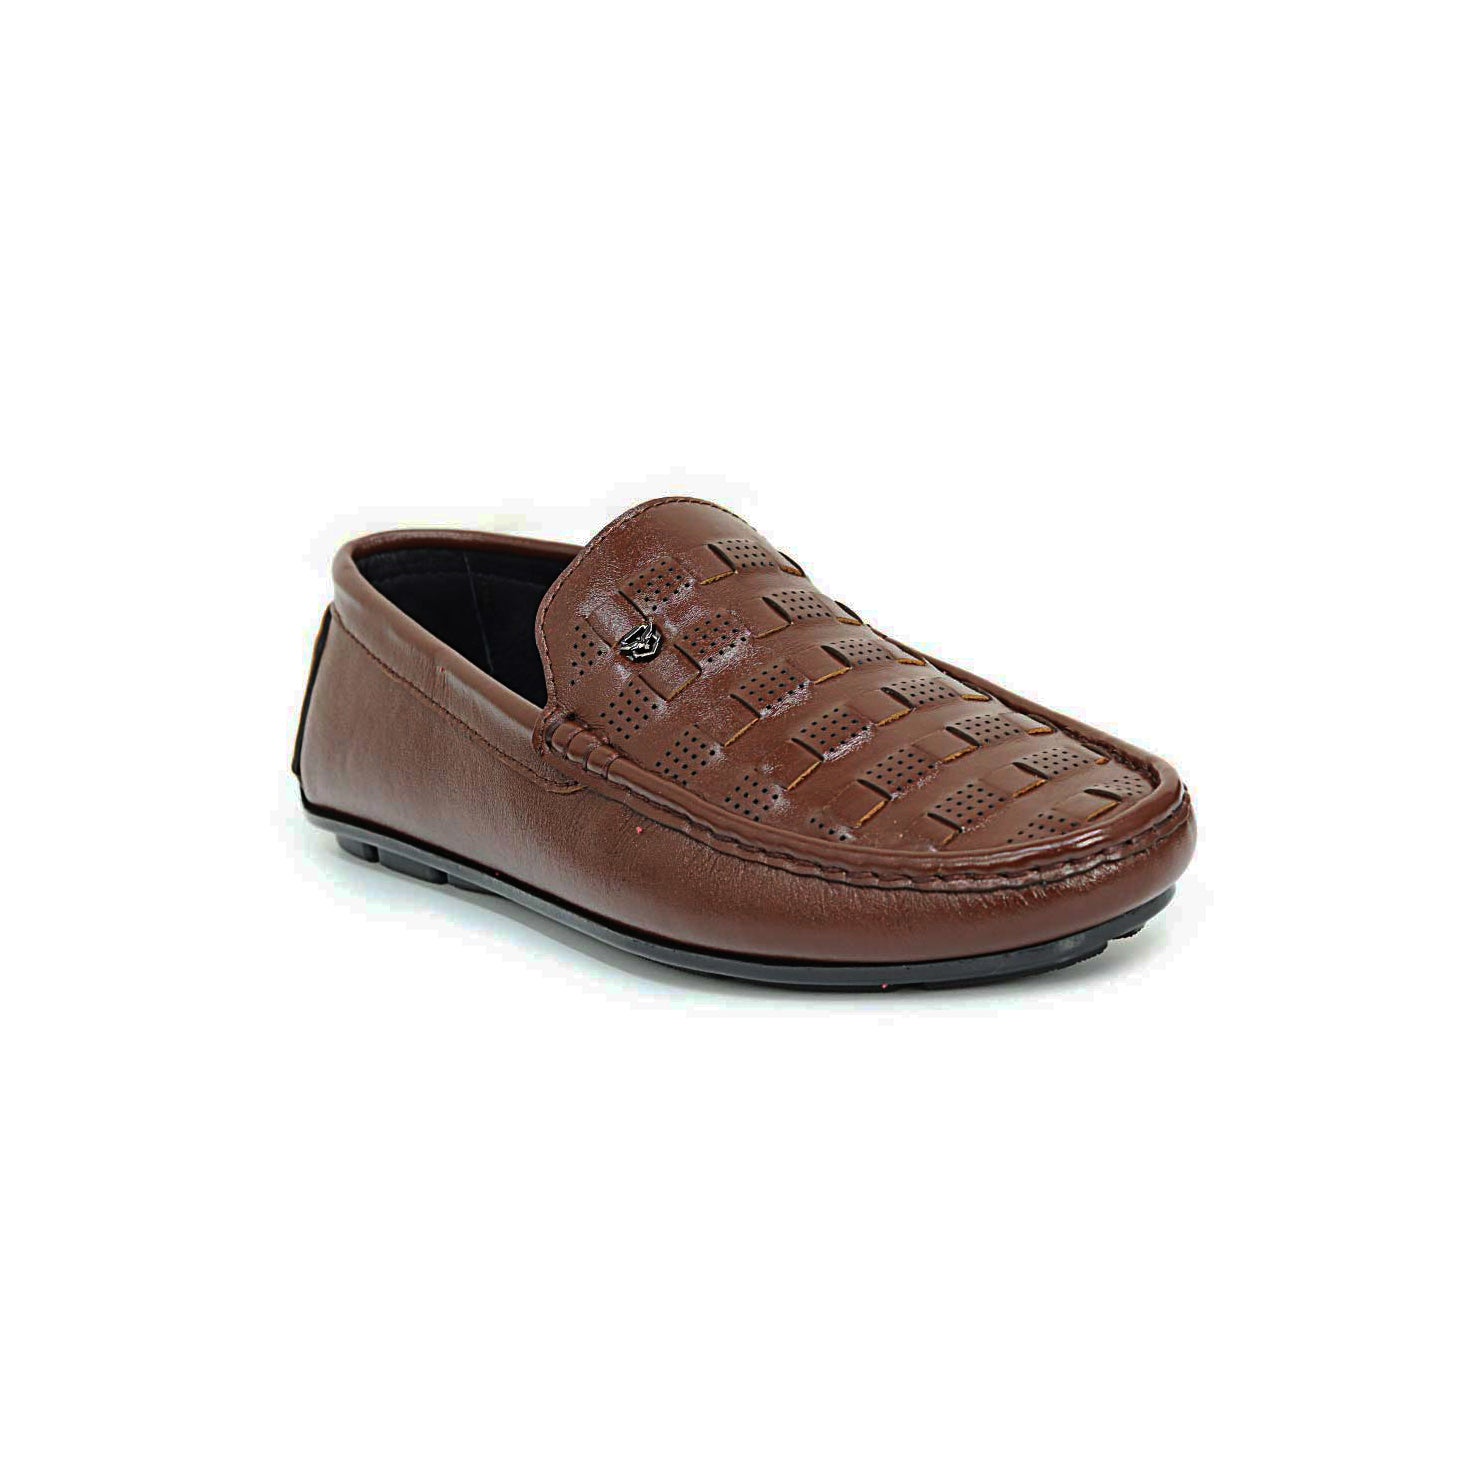 Zays Leather Loafer Shoe For Men (Chocolate) - SF51